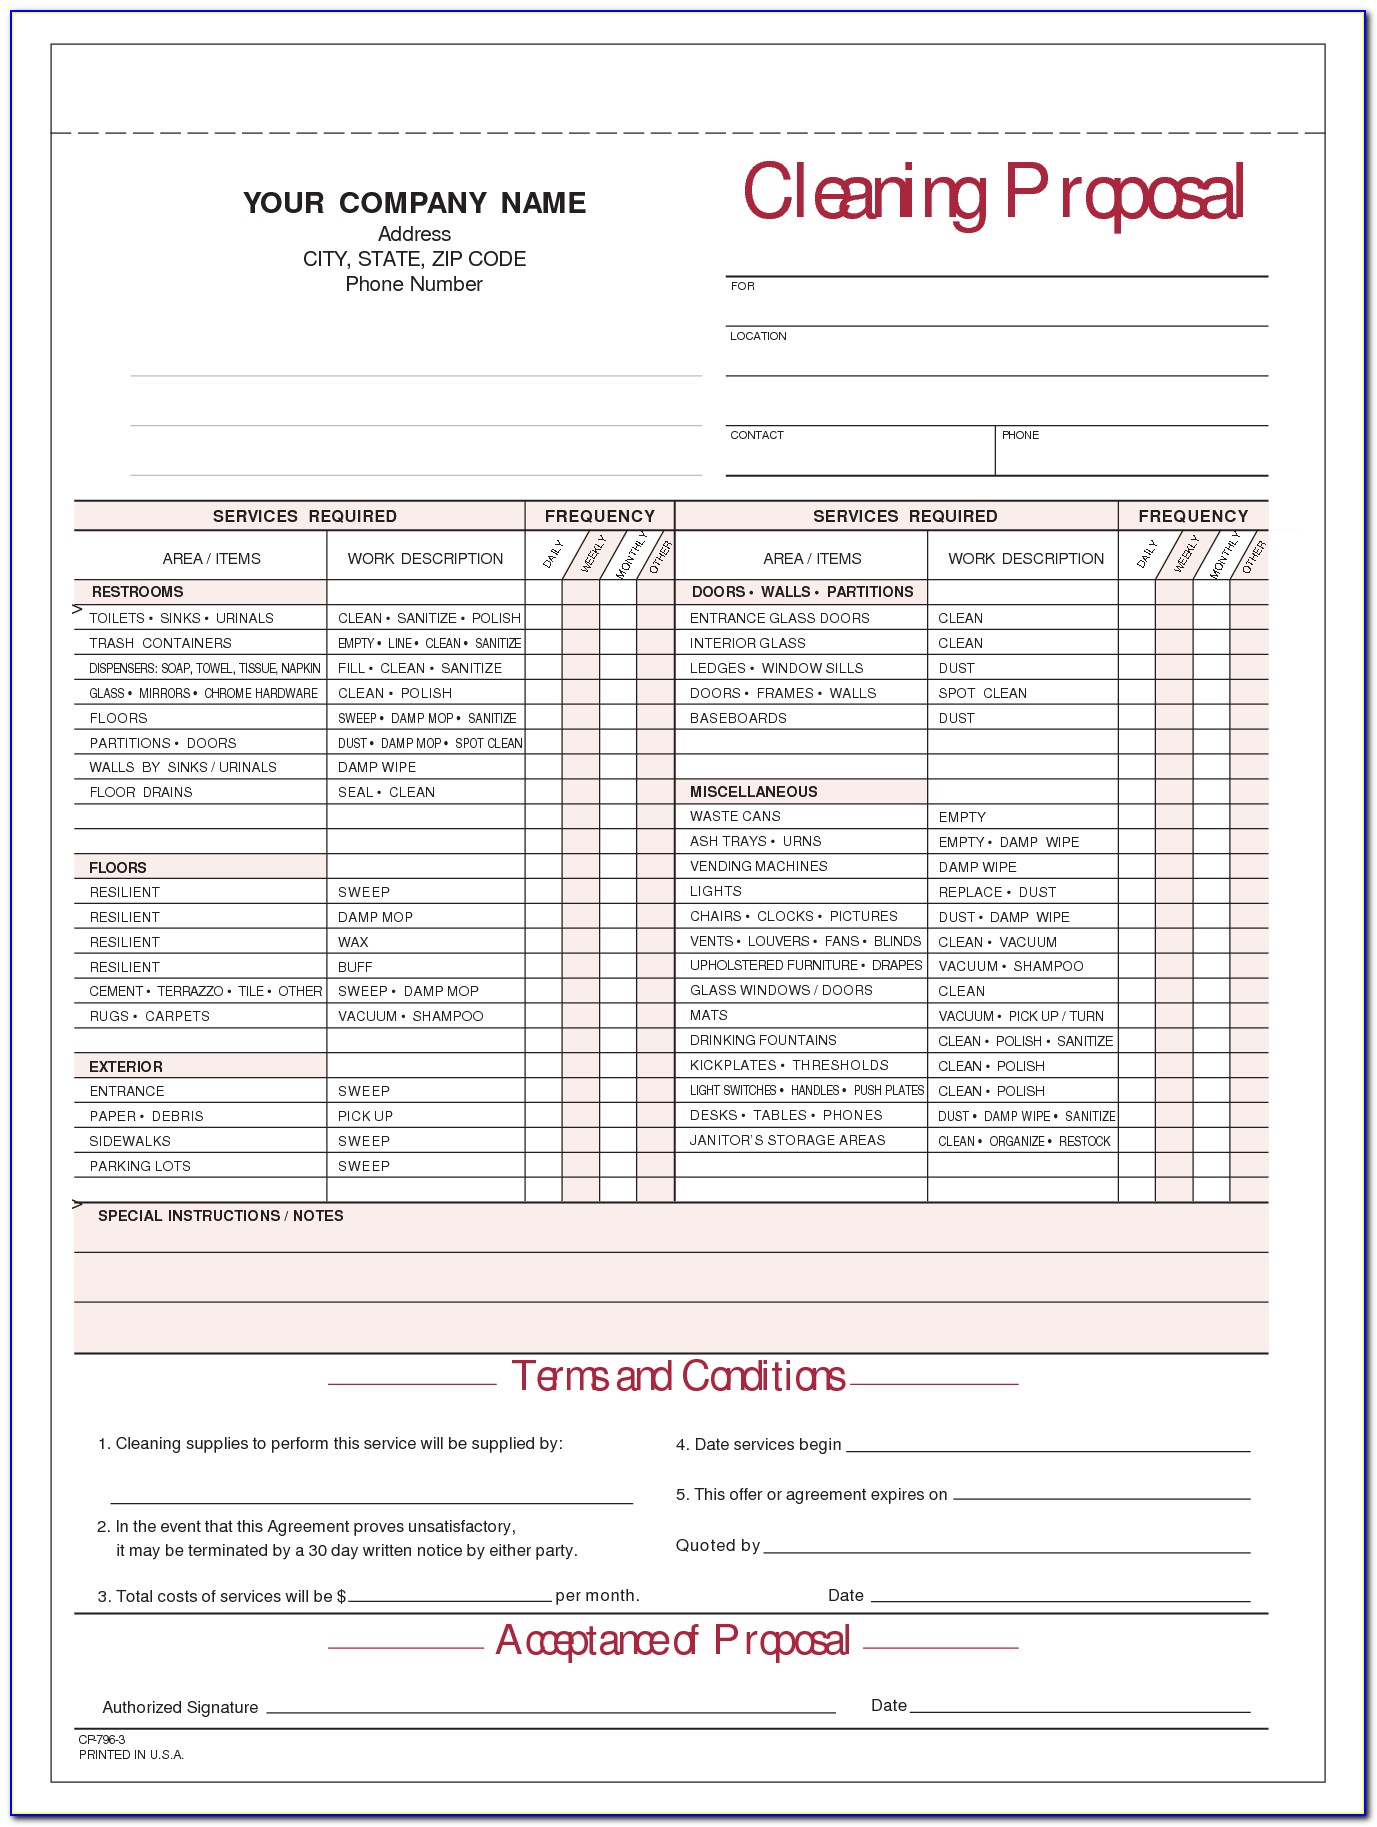 Cleaning Business Proposal Forms